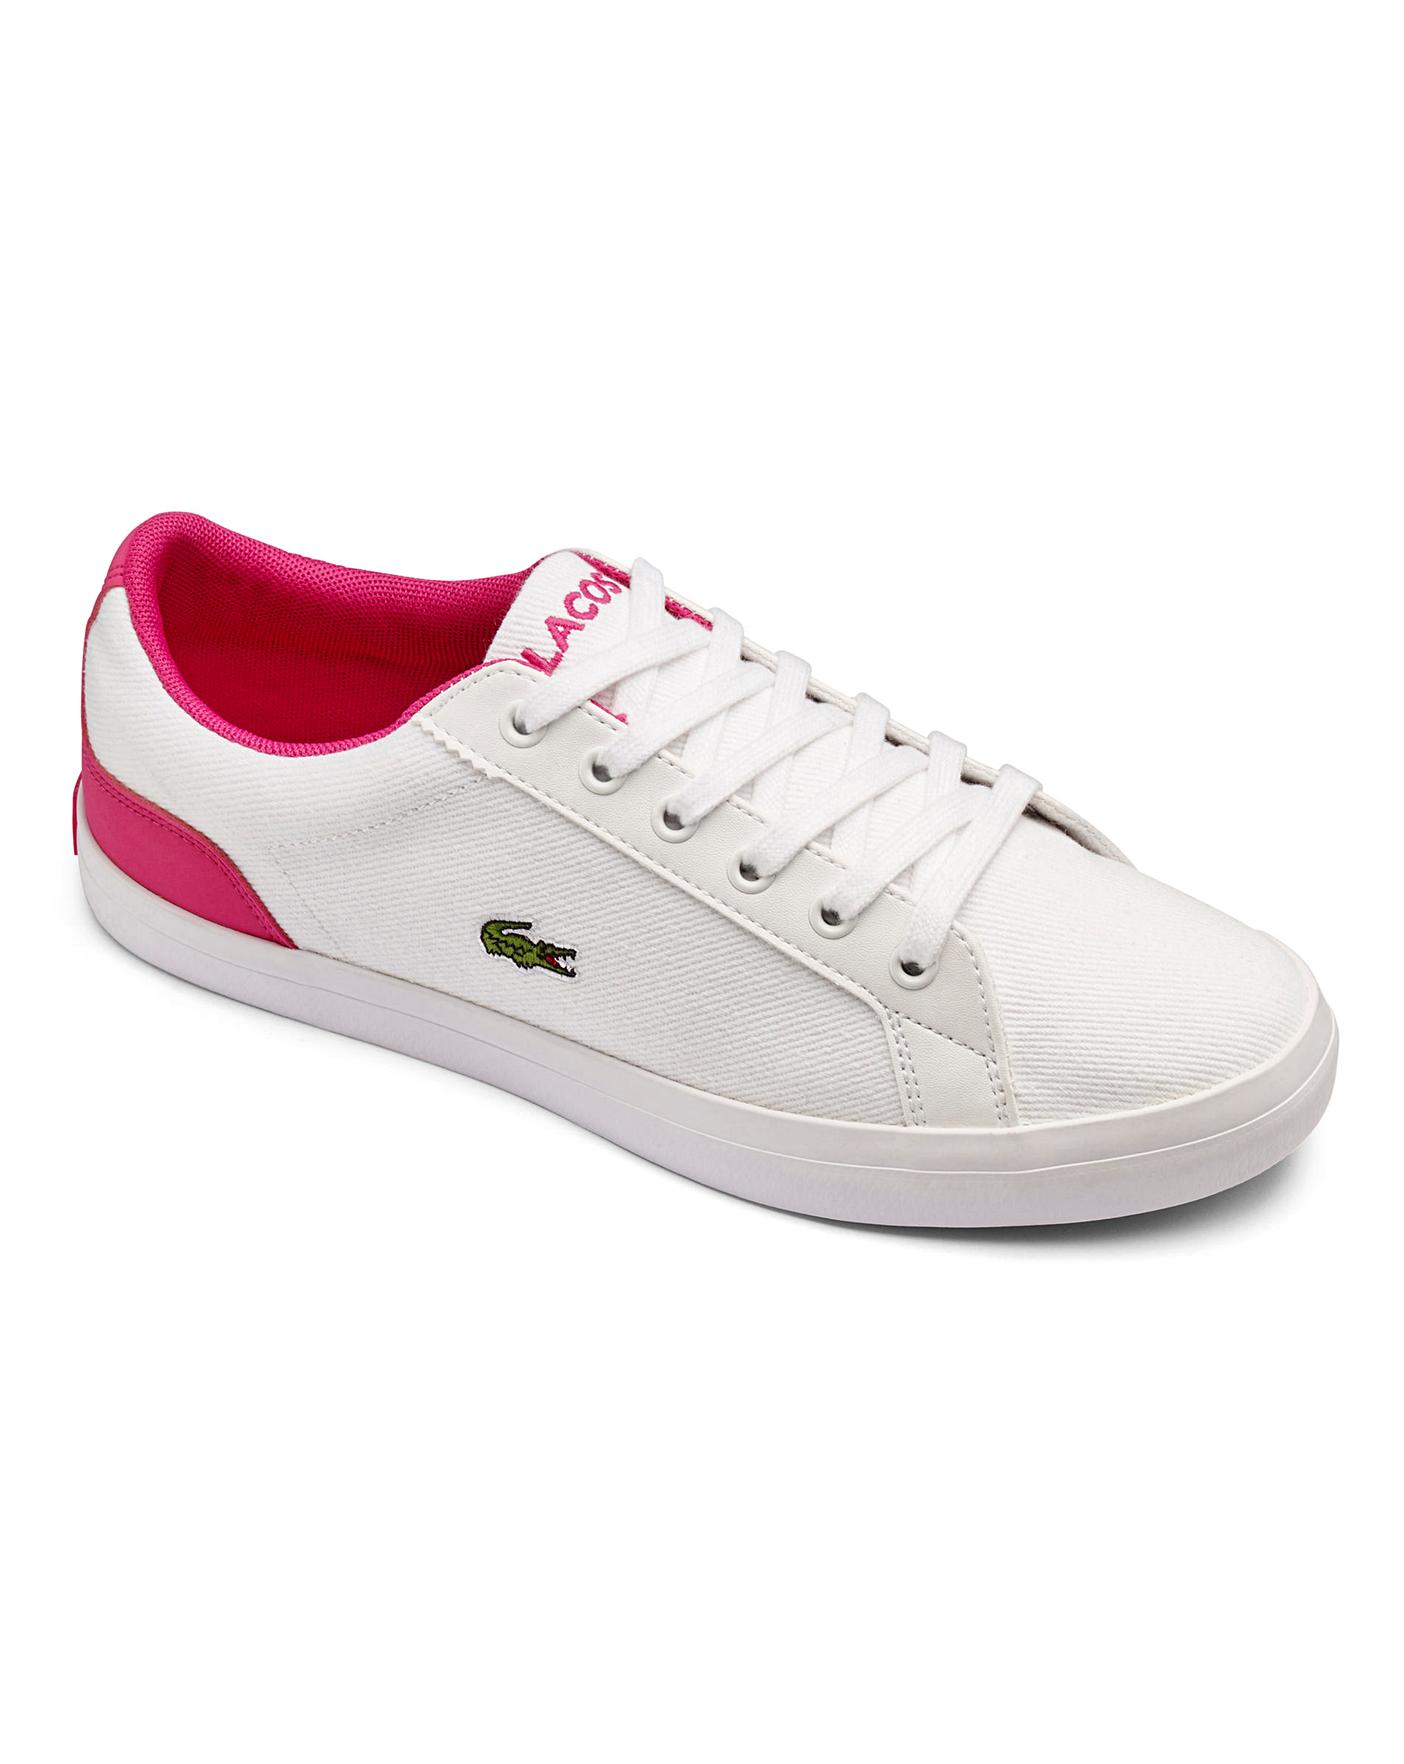 jd lacoste junior trainers off 52 